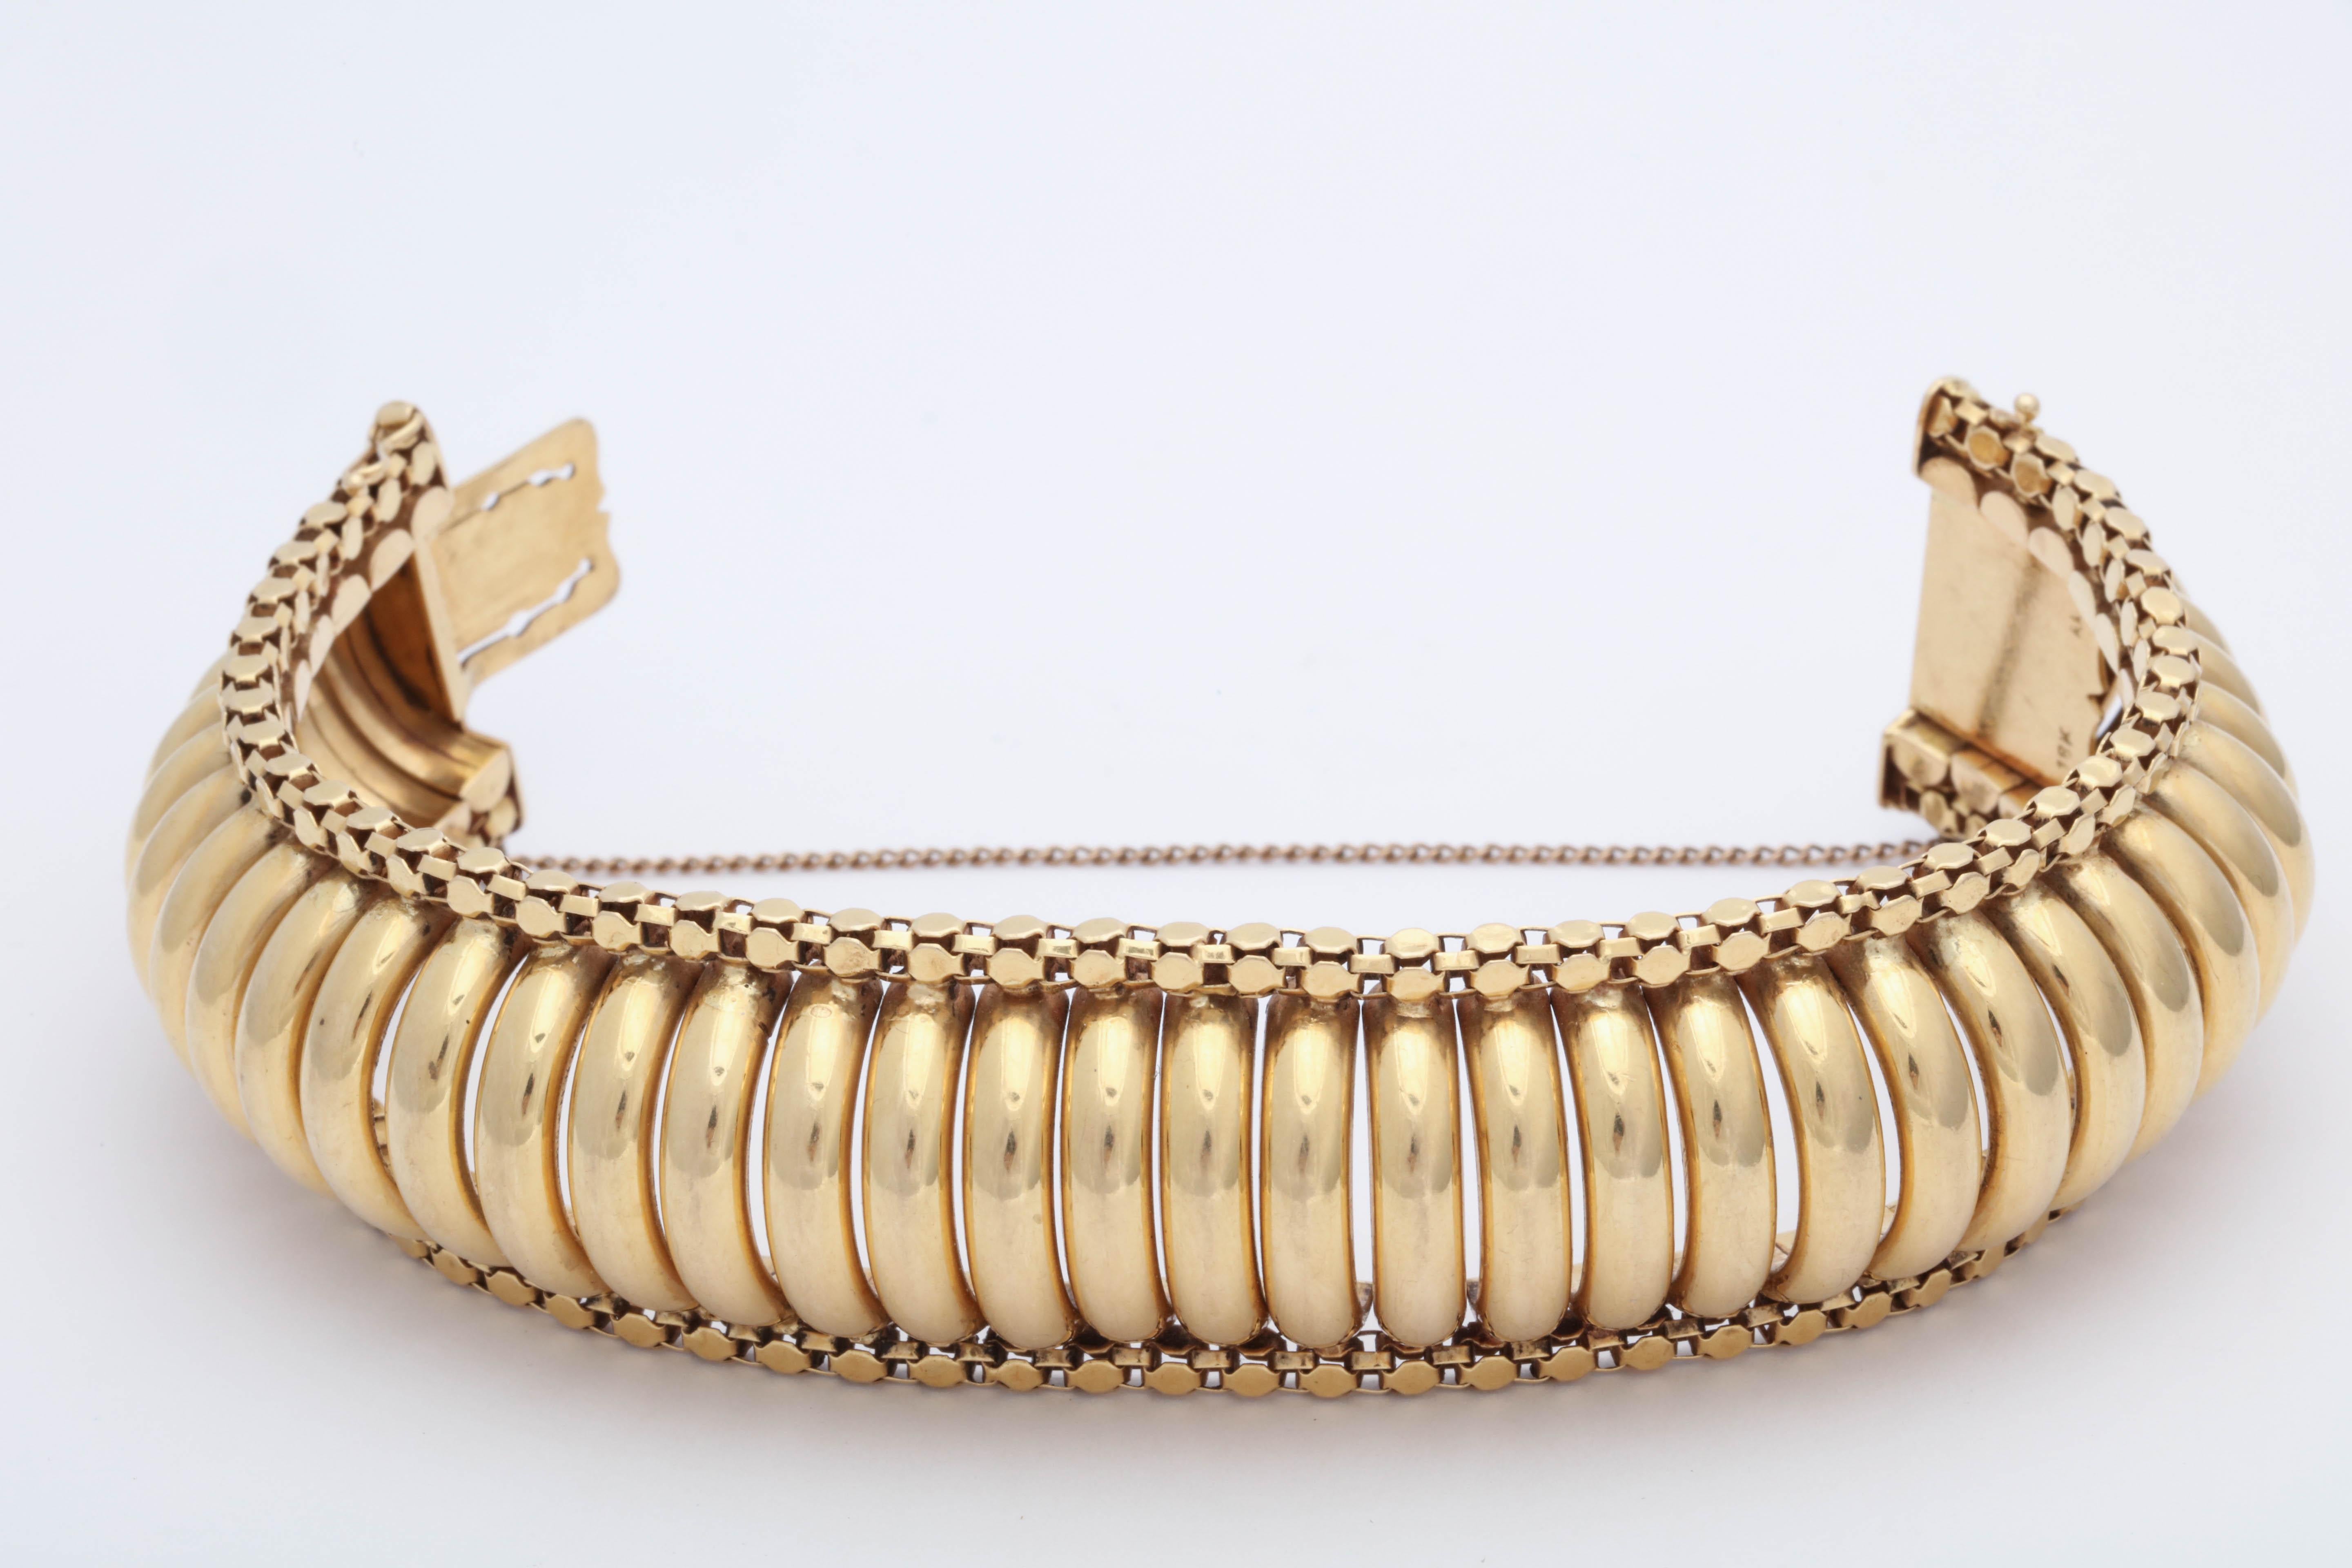 Women's 1960s Accordion Design Flexible Bold Gold Link Bracelet with Safety Mechanism